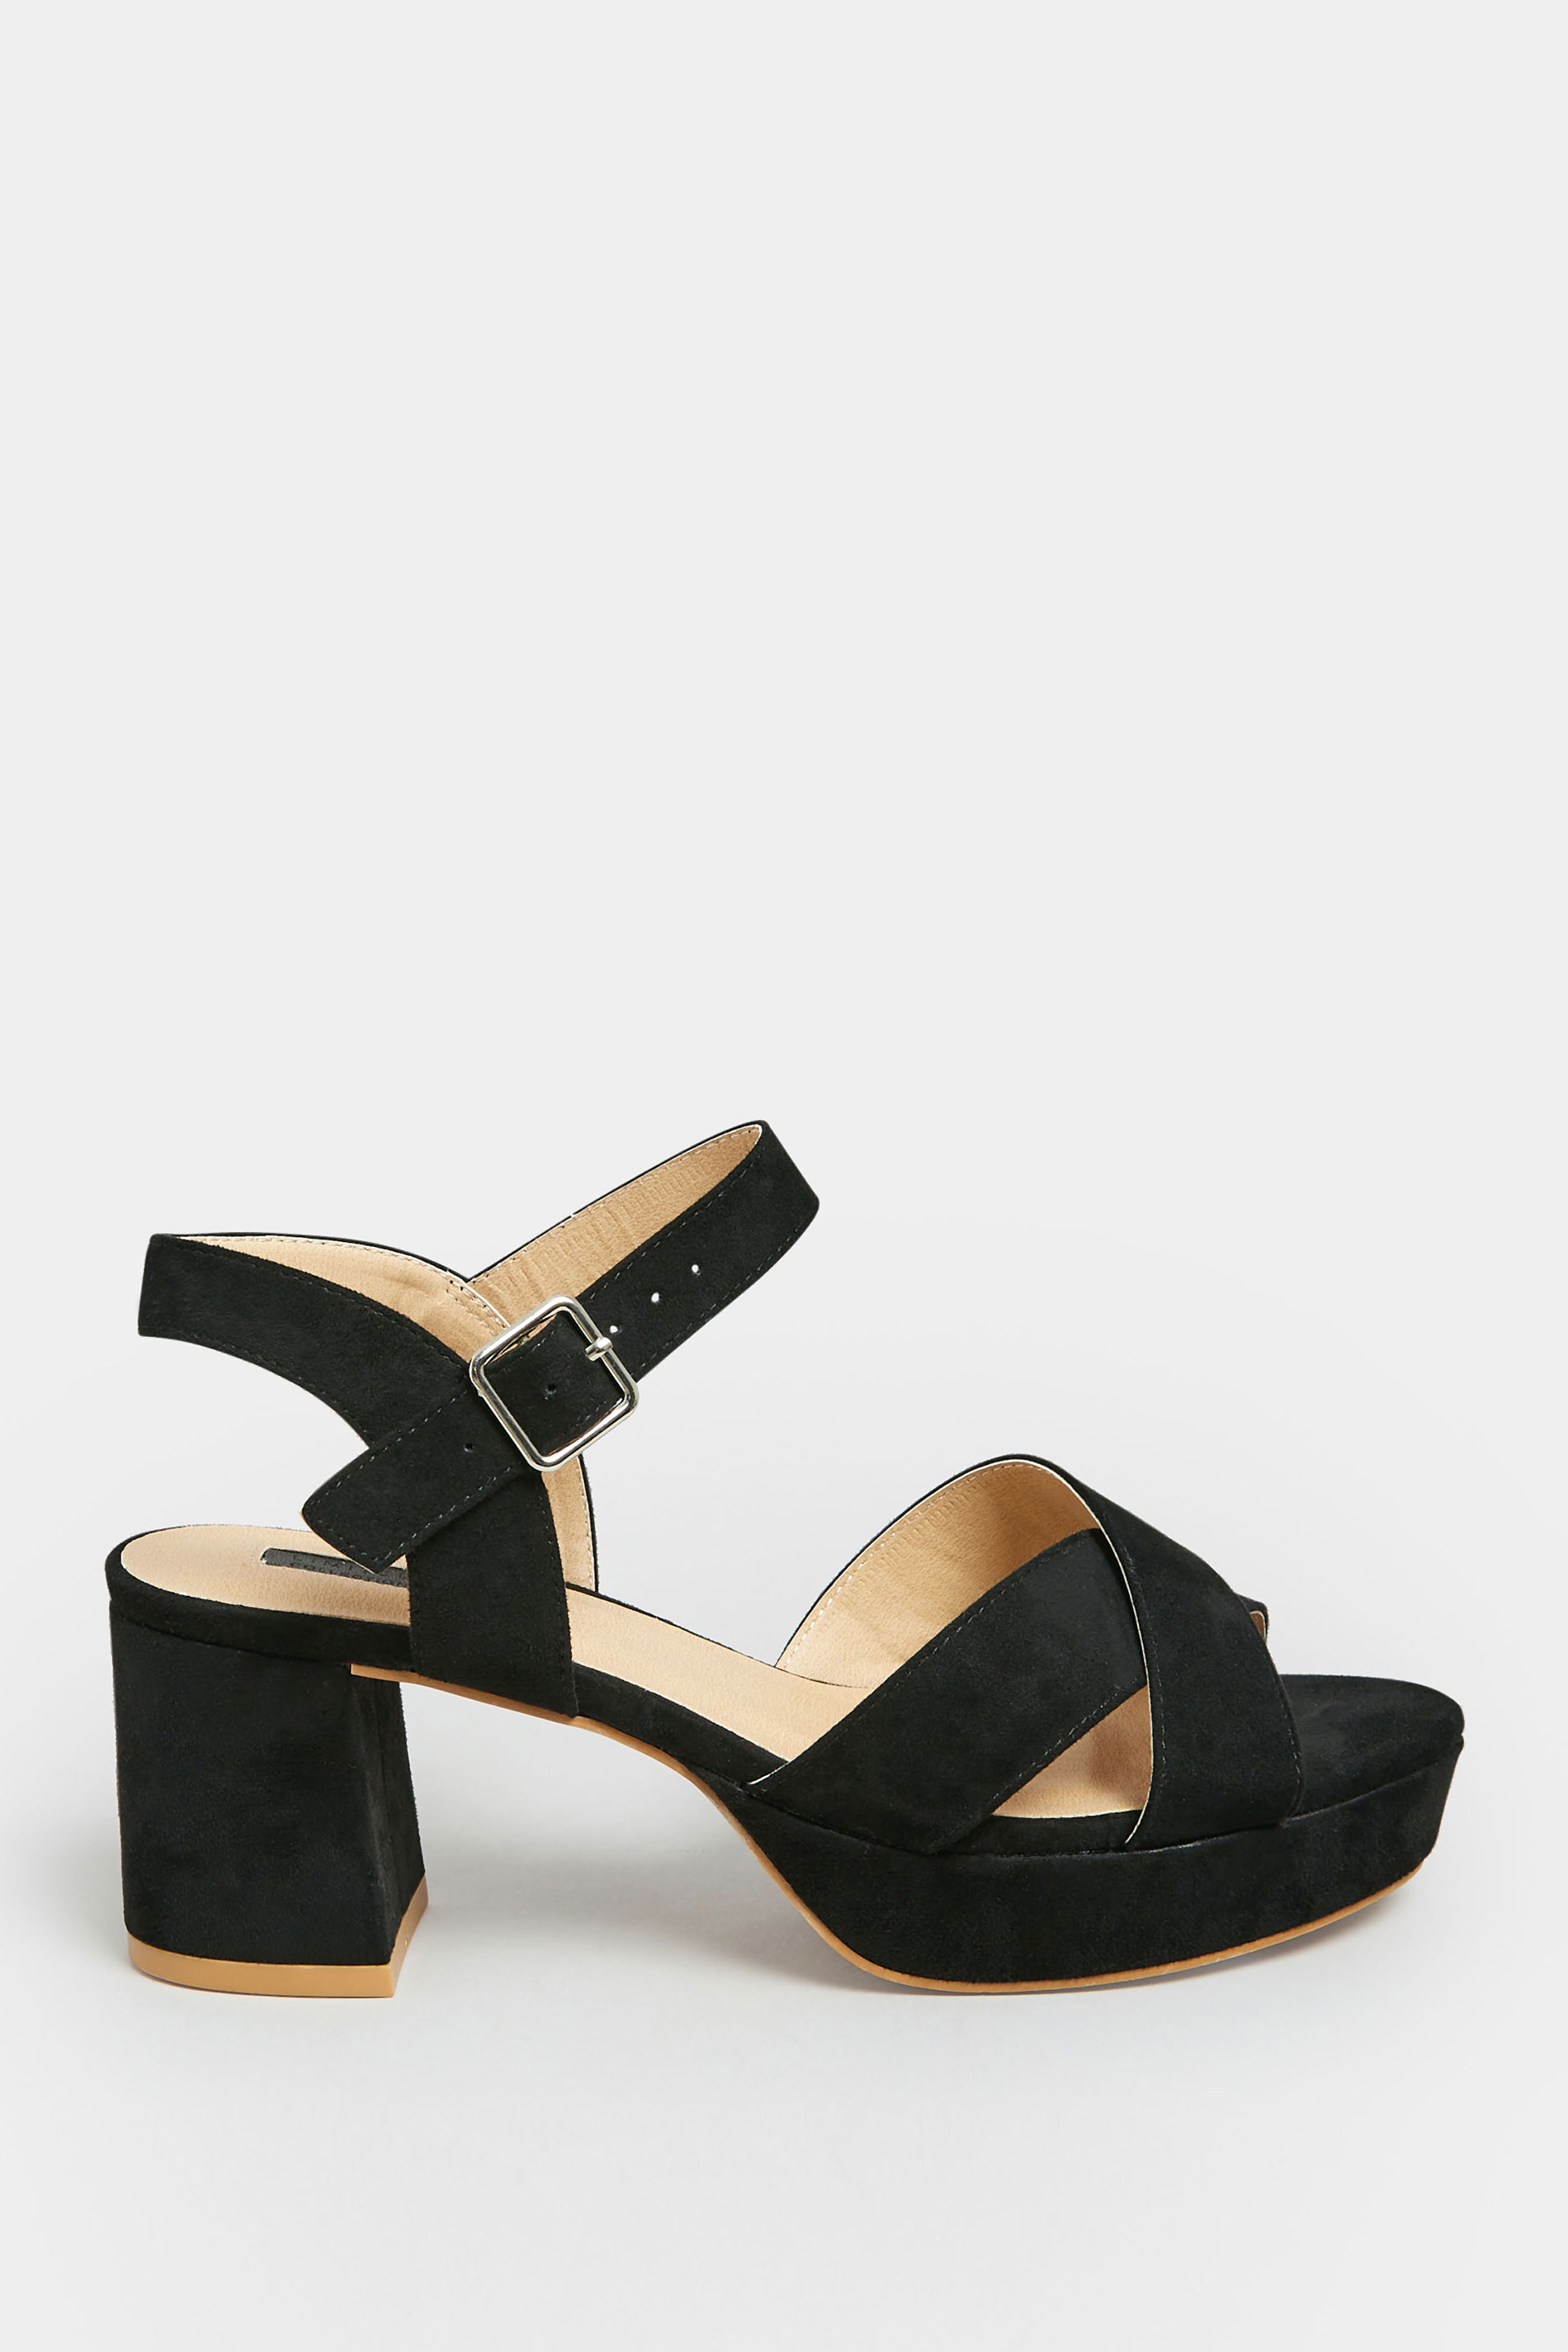 Black Faux Suede Platform Heels In Wide E Fit & Extra Wide EEE Fit | Yours Clothing 3